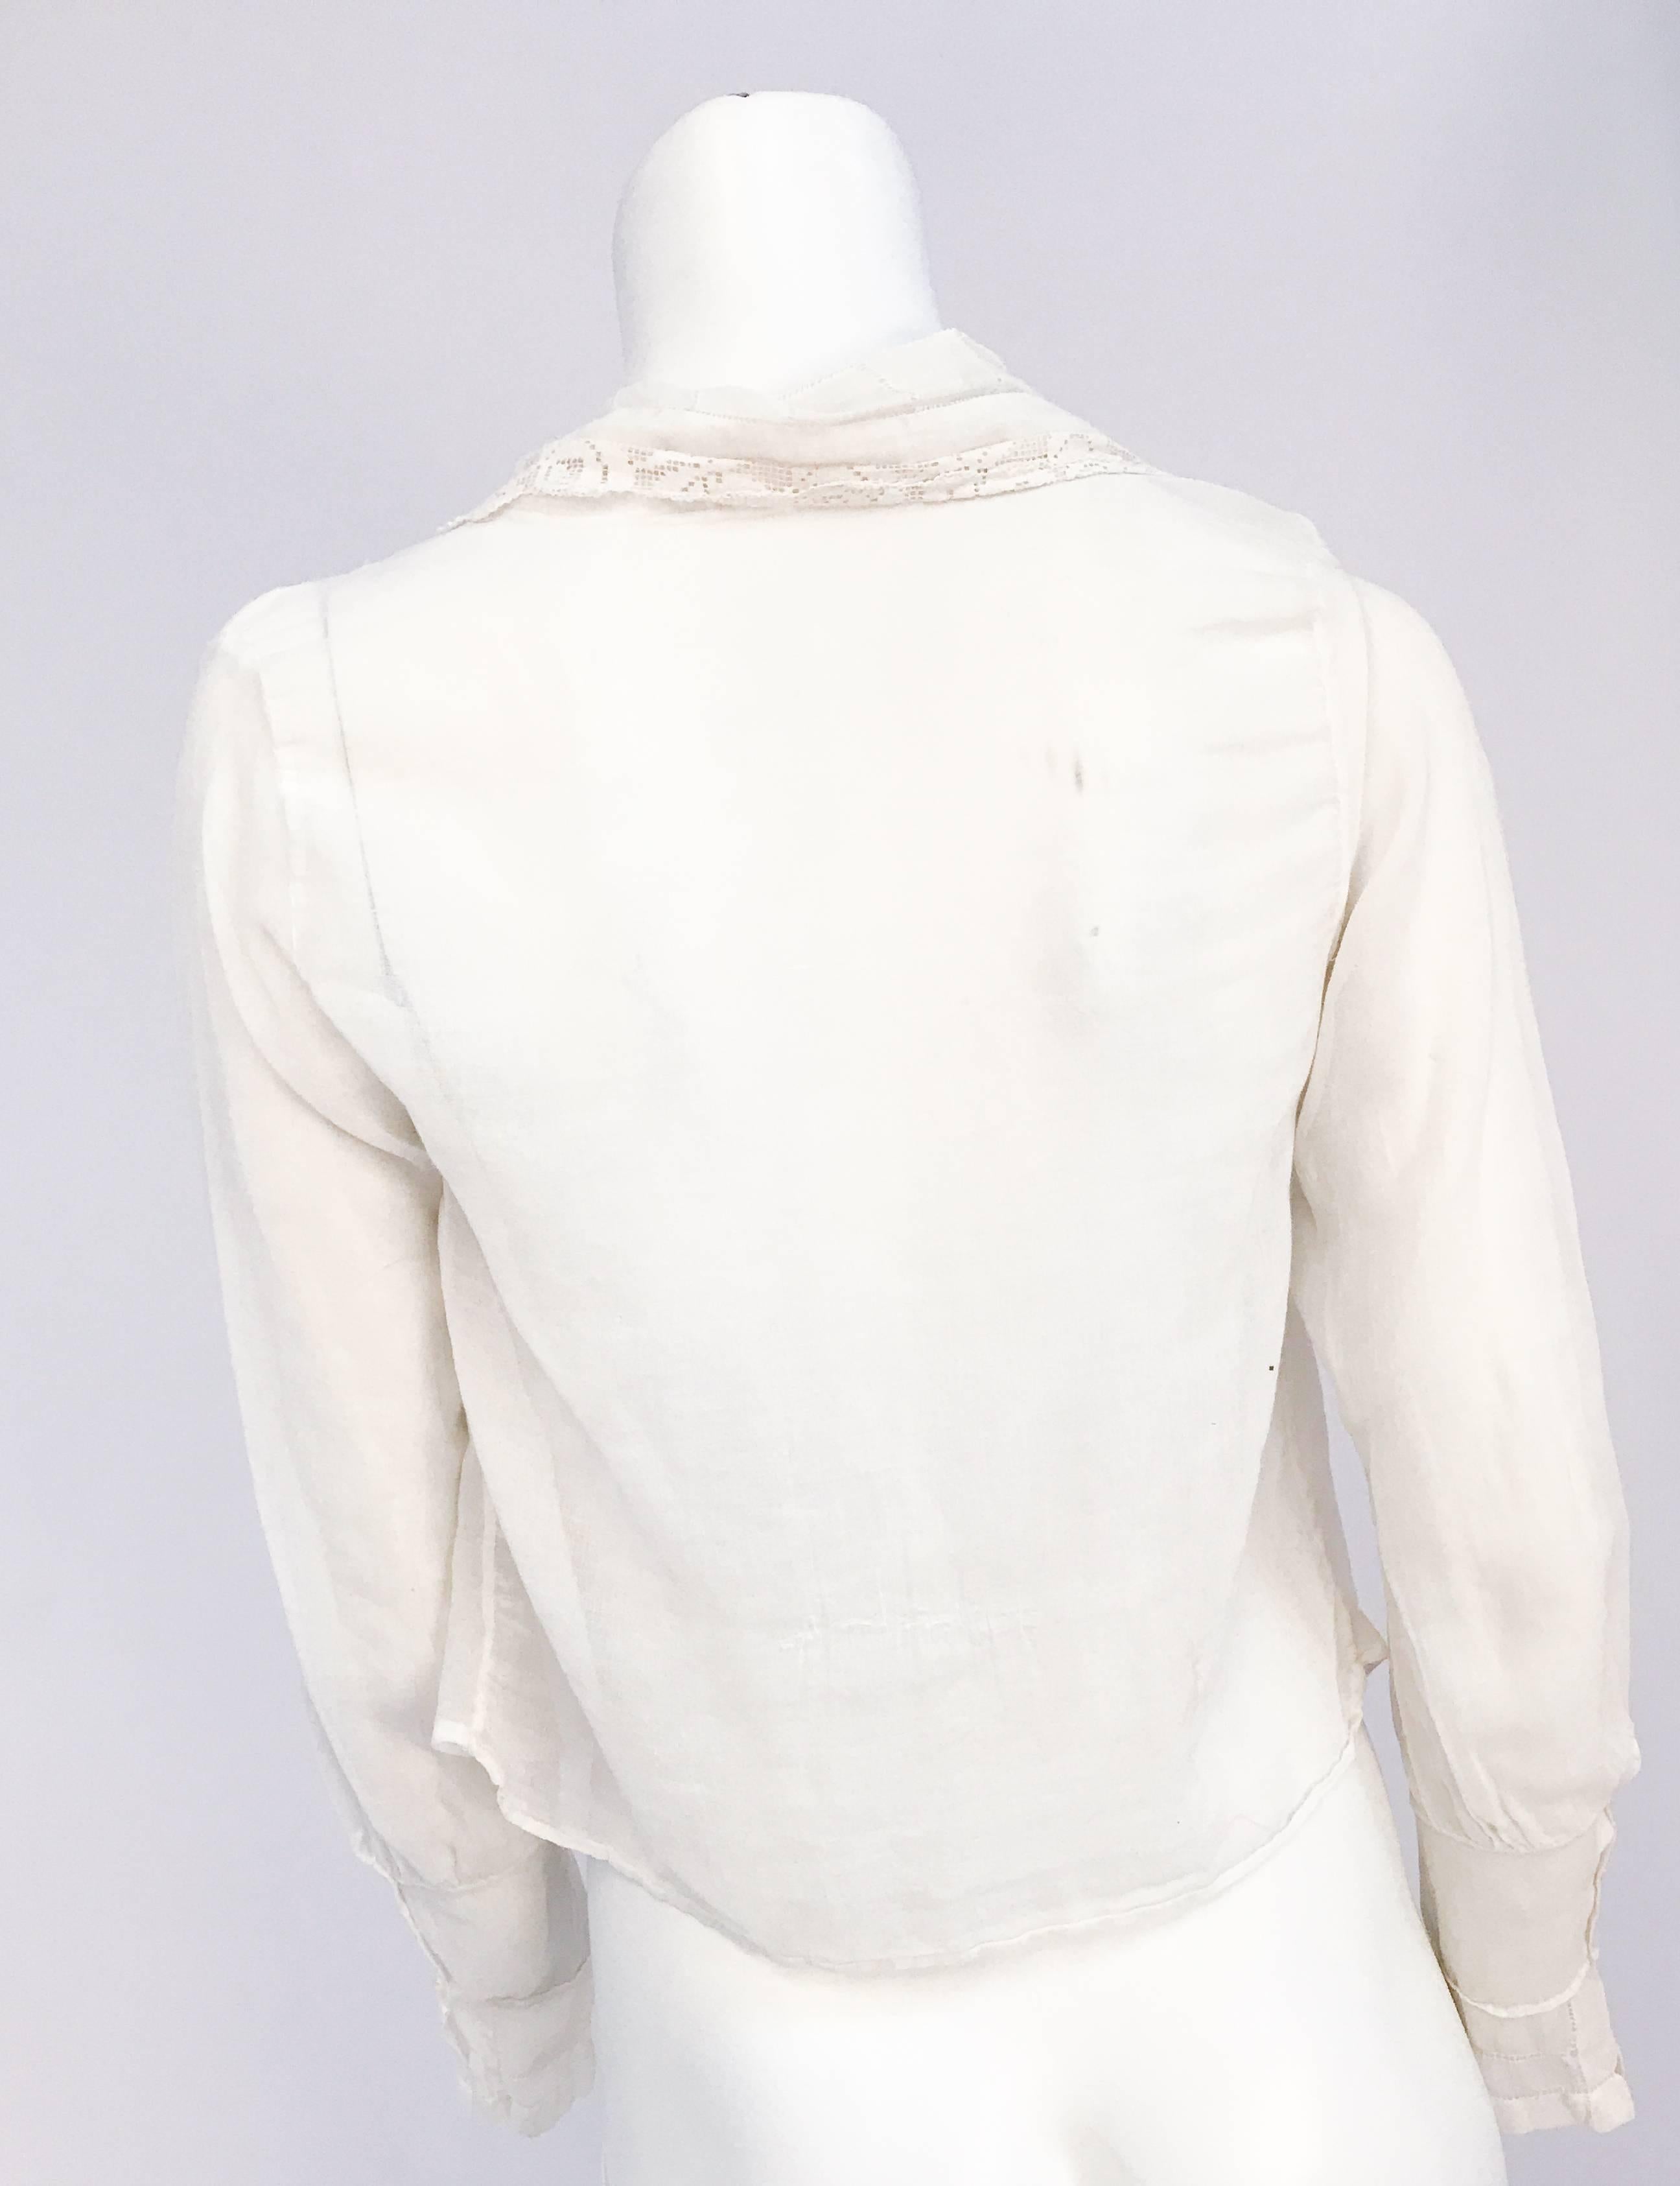 Women's White Handmade Blouse With Lace and Pull Work, Late 1910s  For Sale